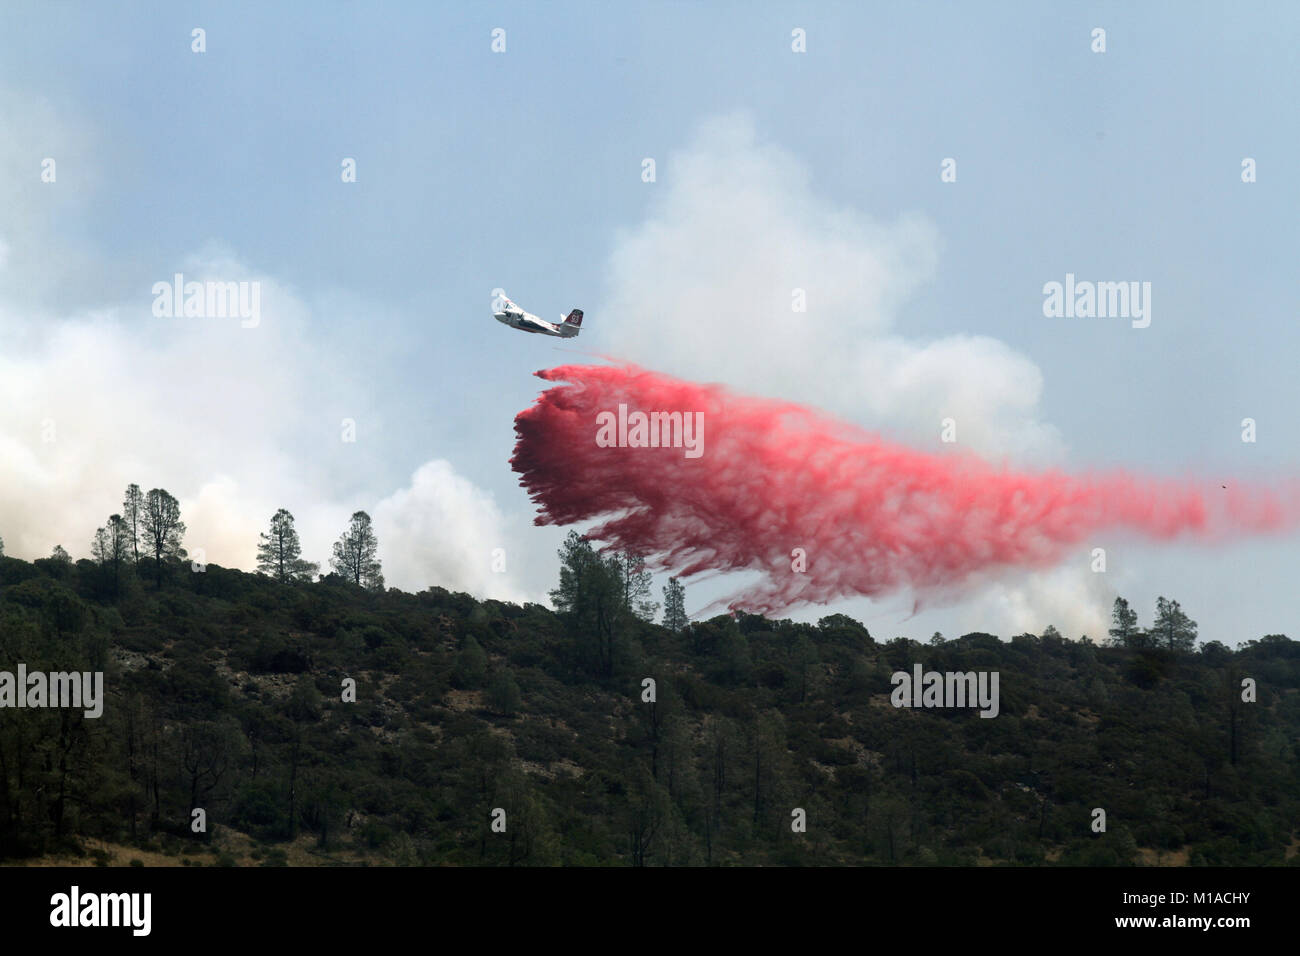 A Department of Forestry and Fire Protection (CAL FIRE) aircraft drop fire retardant Aug. 12 on a hilltop east of Clearlake, California, during the Jerusalem Fire in Lake County, California. (U.S. Army National Guard photo/Staff Sgt. Eddie Siguenza) Stock Photo